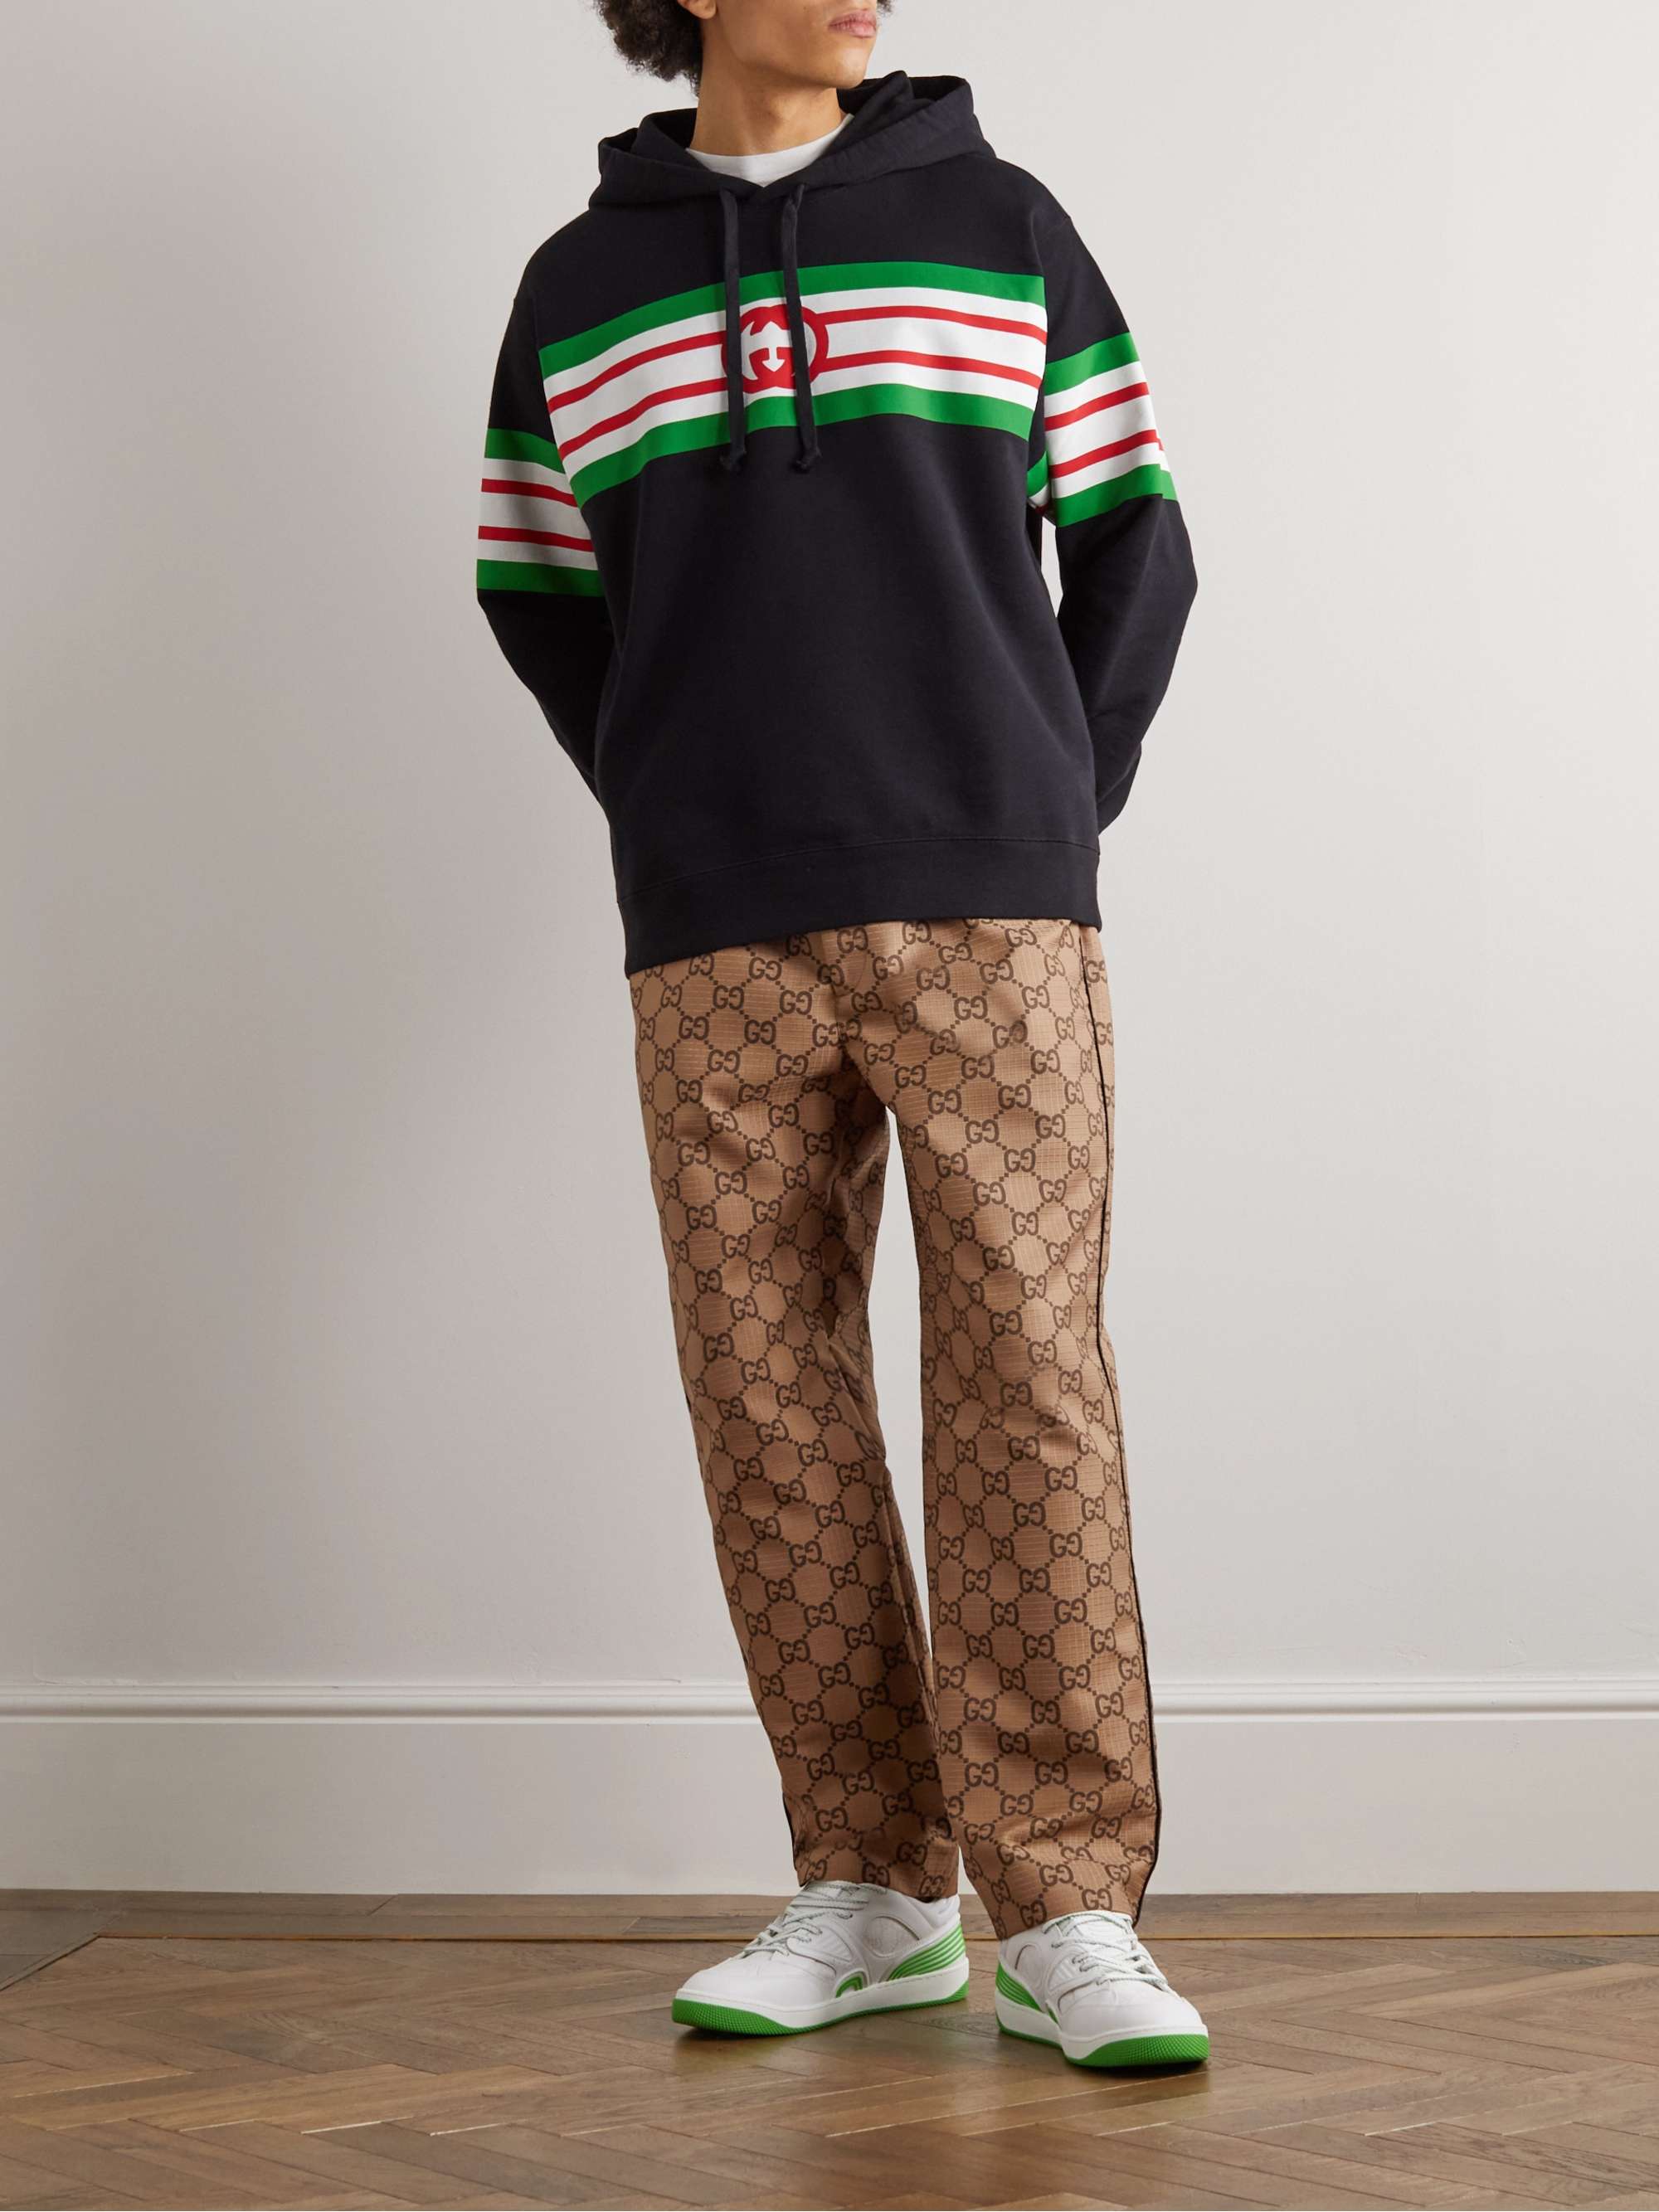 Gucci - Men - Straight-Leg Monogrammed Textured-crepe Trousers Brown - It 50